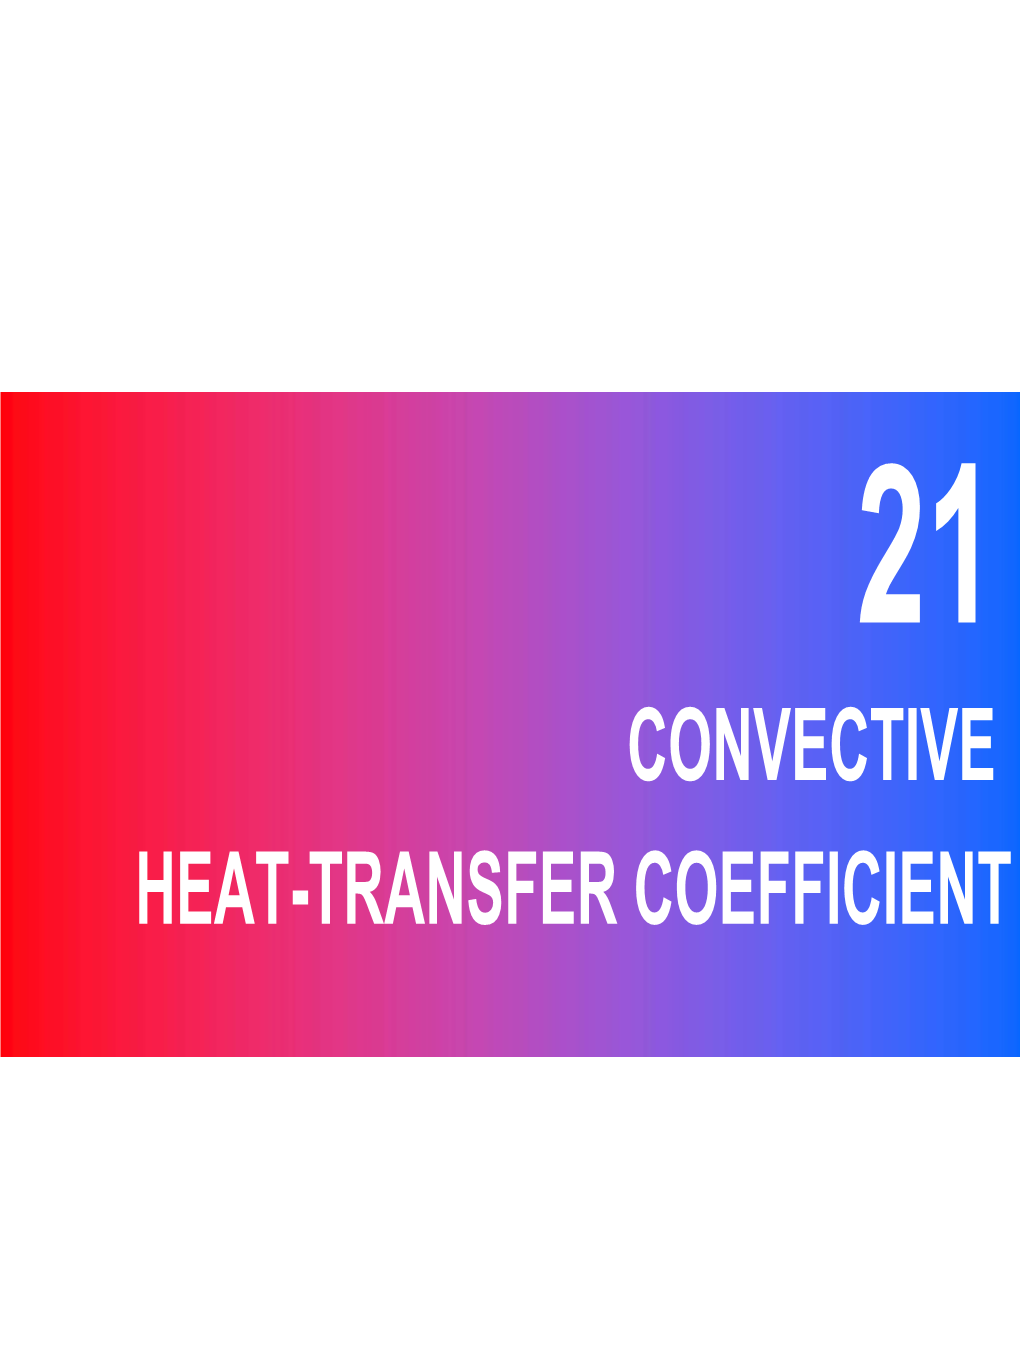 CONVECTIVE HEAT-TRANSFER COEFFICIENT Introduction